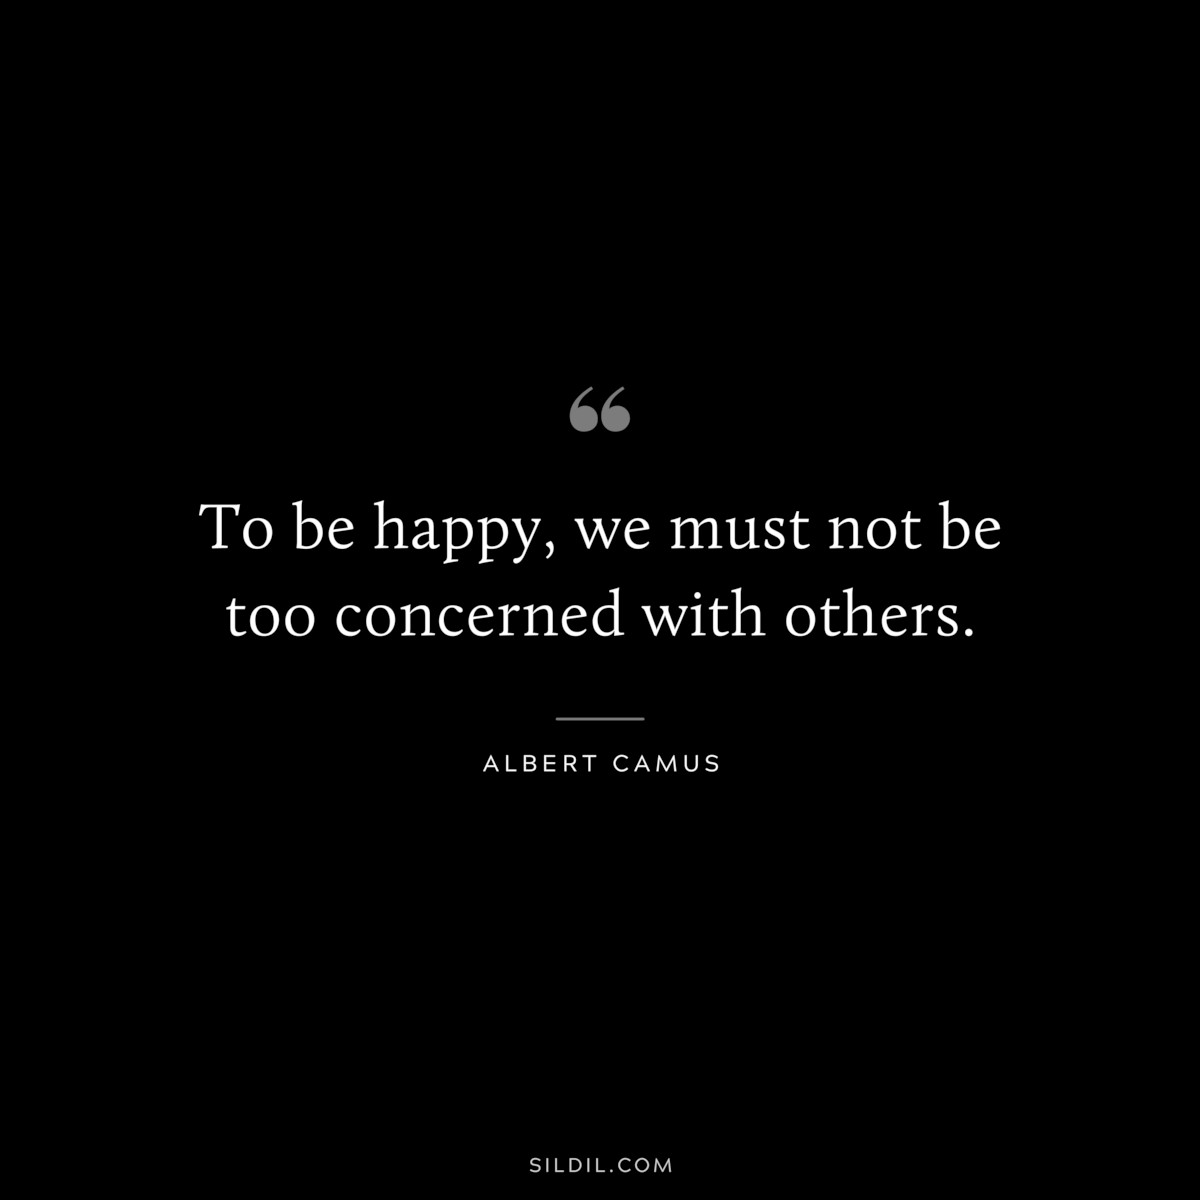 To be happy, we must not be too concerned with others. ― Albert Camus